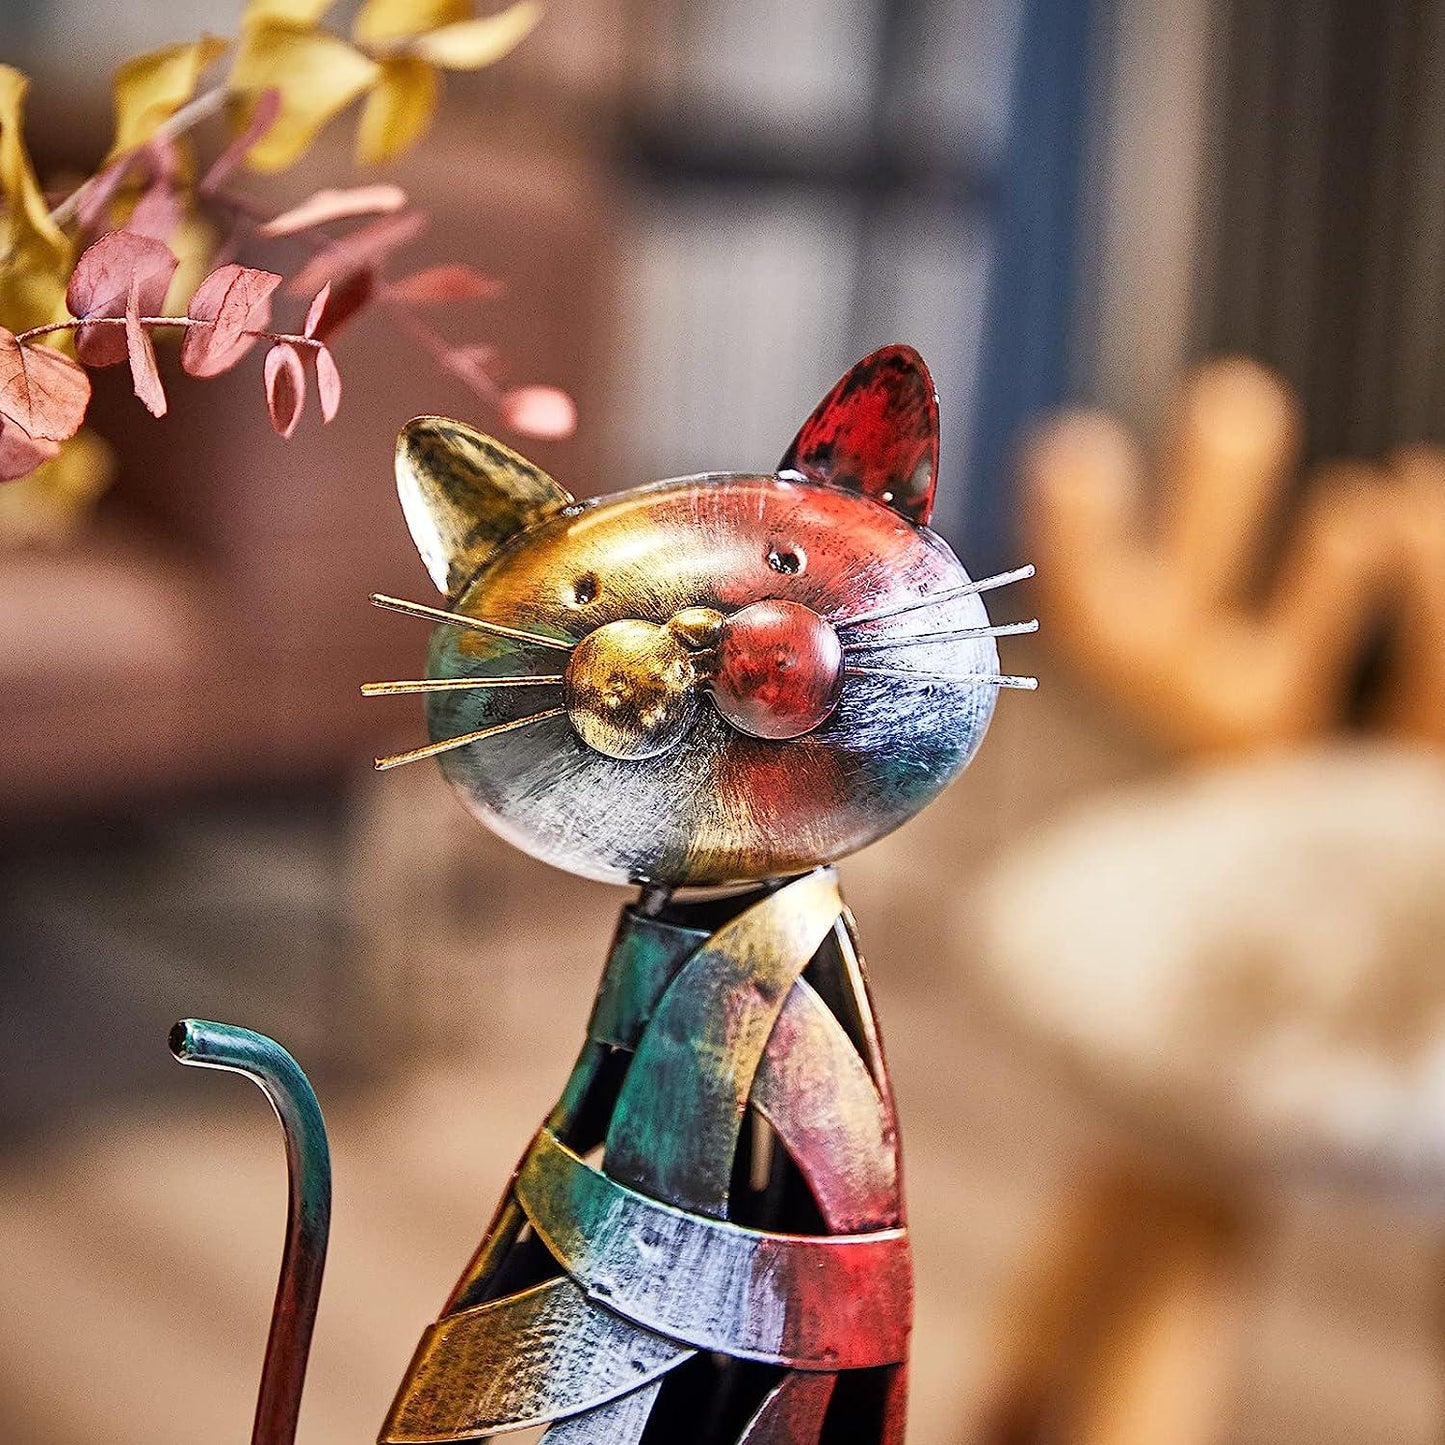 13.5 H Cat Statue - Metal Iron Cat Figurine Kitchen Décor Oil Painting Color Finish Sculpture Gift for Dining Room Living Room Kitchen Garden Patio Lawn (13.5 H Cat)